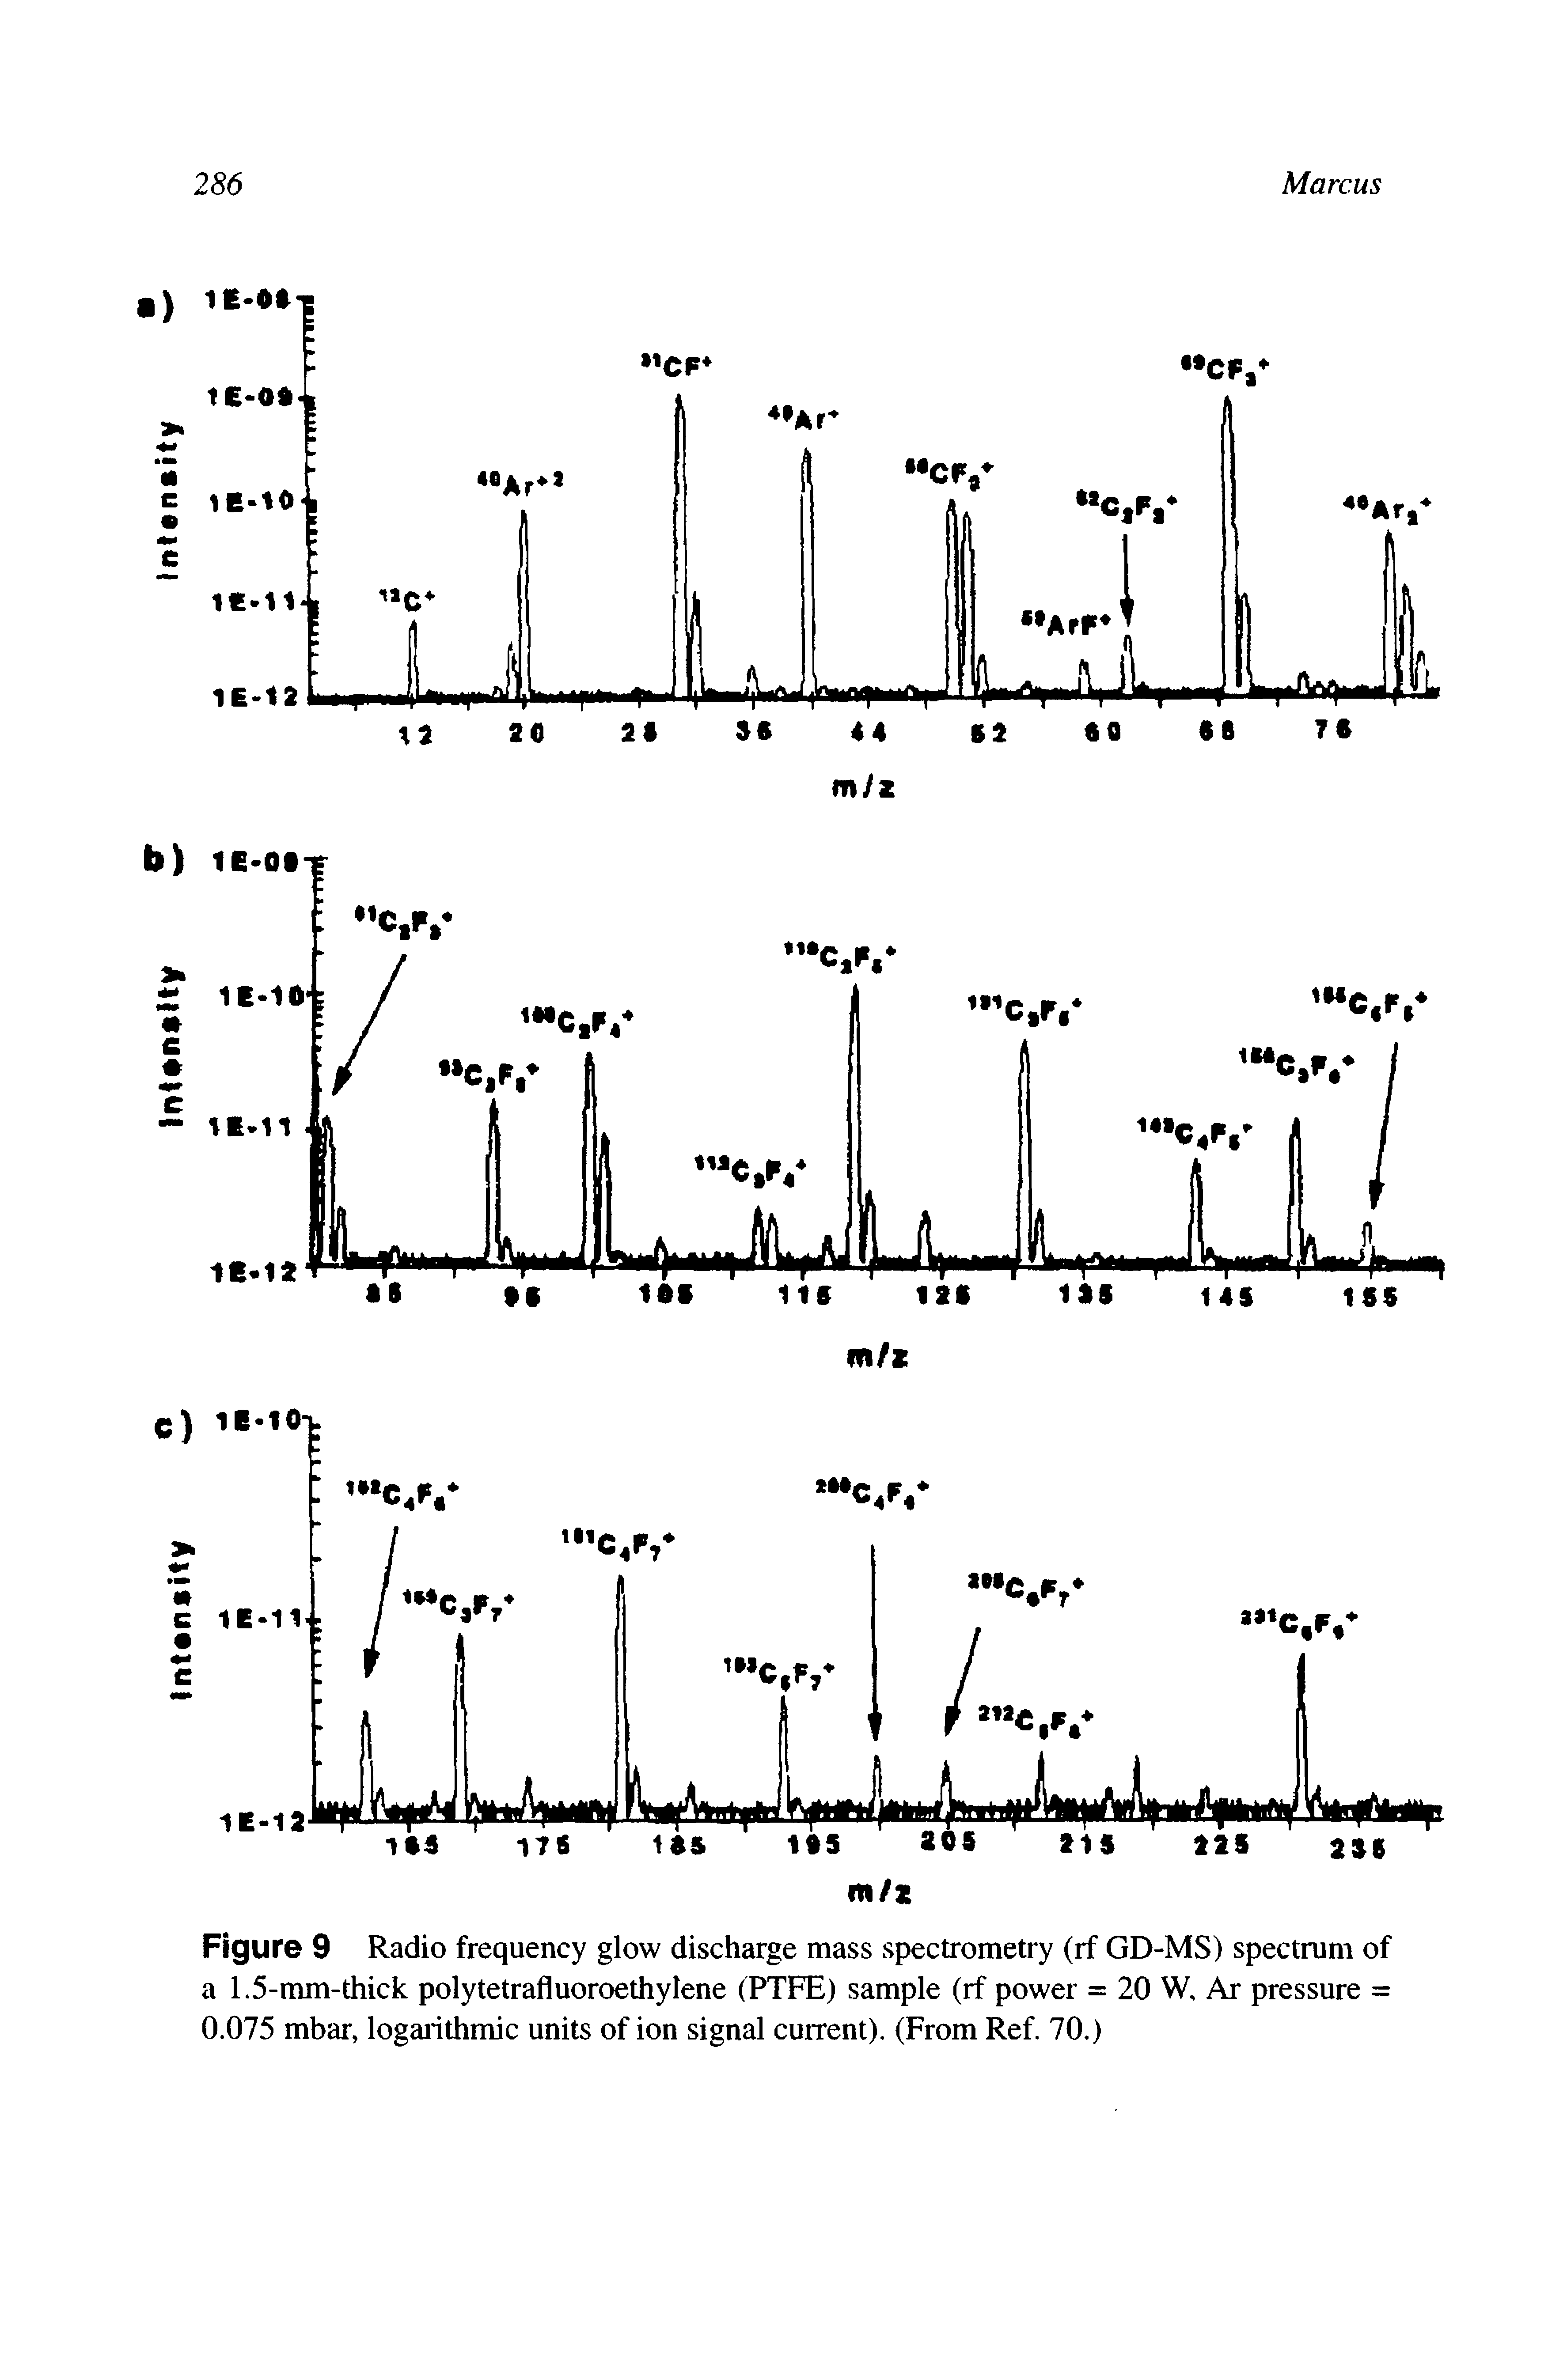 Figure 9 Radio frequency glow discharge mass spectrometry (rf GD-MS) spectrum of a 1.5-mm-thick polytetrafluoroethylene (PTFE) sample (rf power = 20 W, Ar pressure = 0.075 mbar, logarithmic units of ion signal current). (From Ref. 70.)...